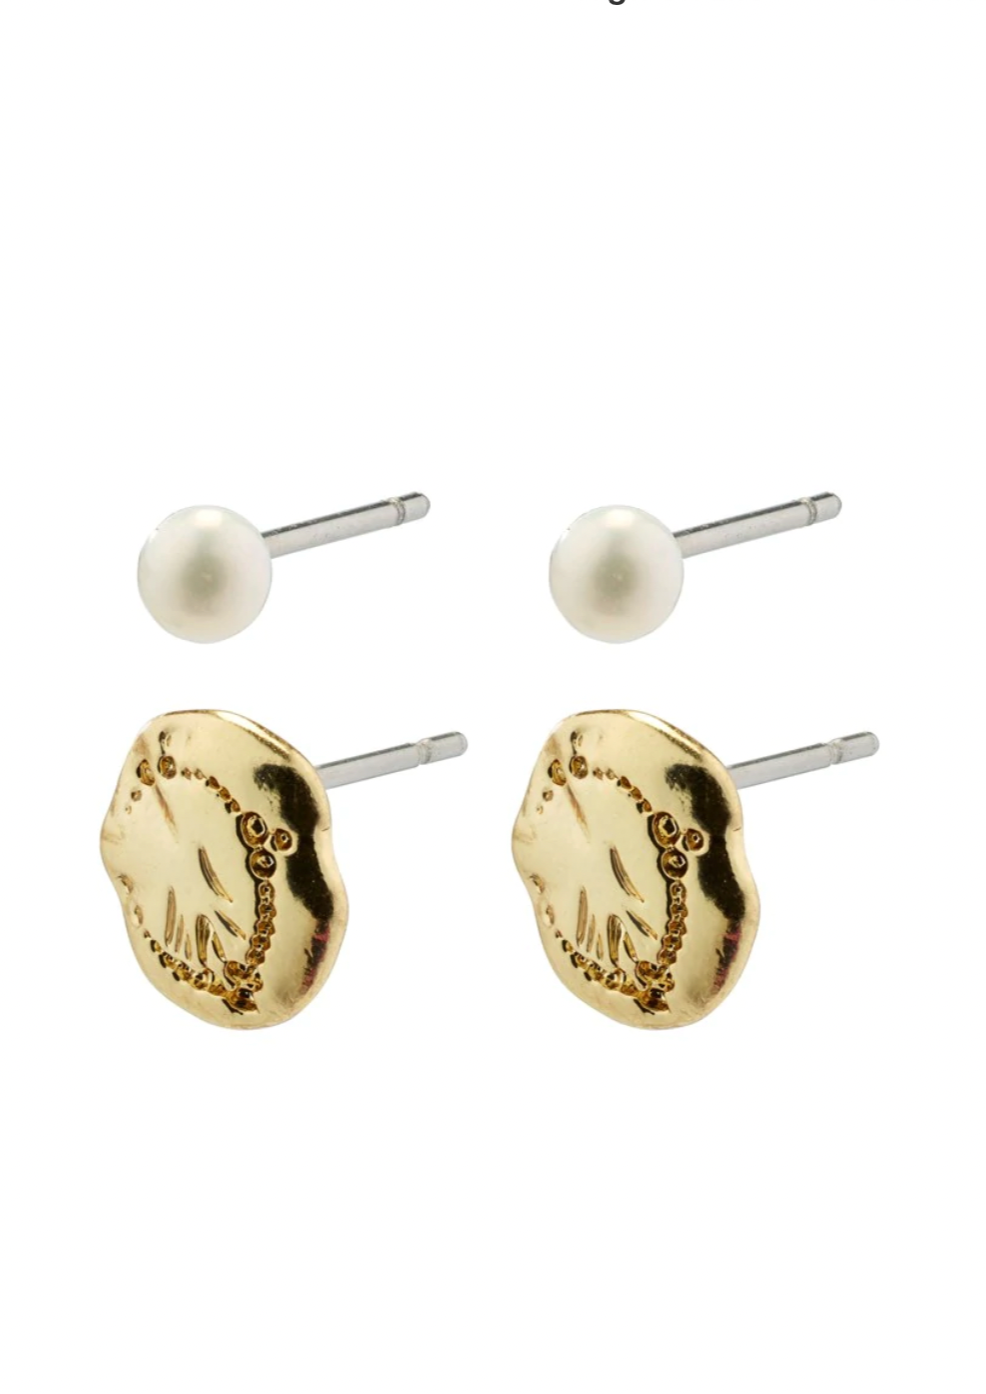 Jola Earrings - Gold Plated/White, by Pilgrim It’s all in the details. With the gold-plated 2-in-1 set from Pilgrim, you get 2 pairs of small elegant ear studs for your stylish everyday looks. The white freshwater pearls create a simplistic and romantic piece, while the matching gold-plated studs have a handcrafted feel with irregular shapes and a nature-inspired embossed surface.